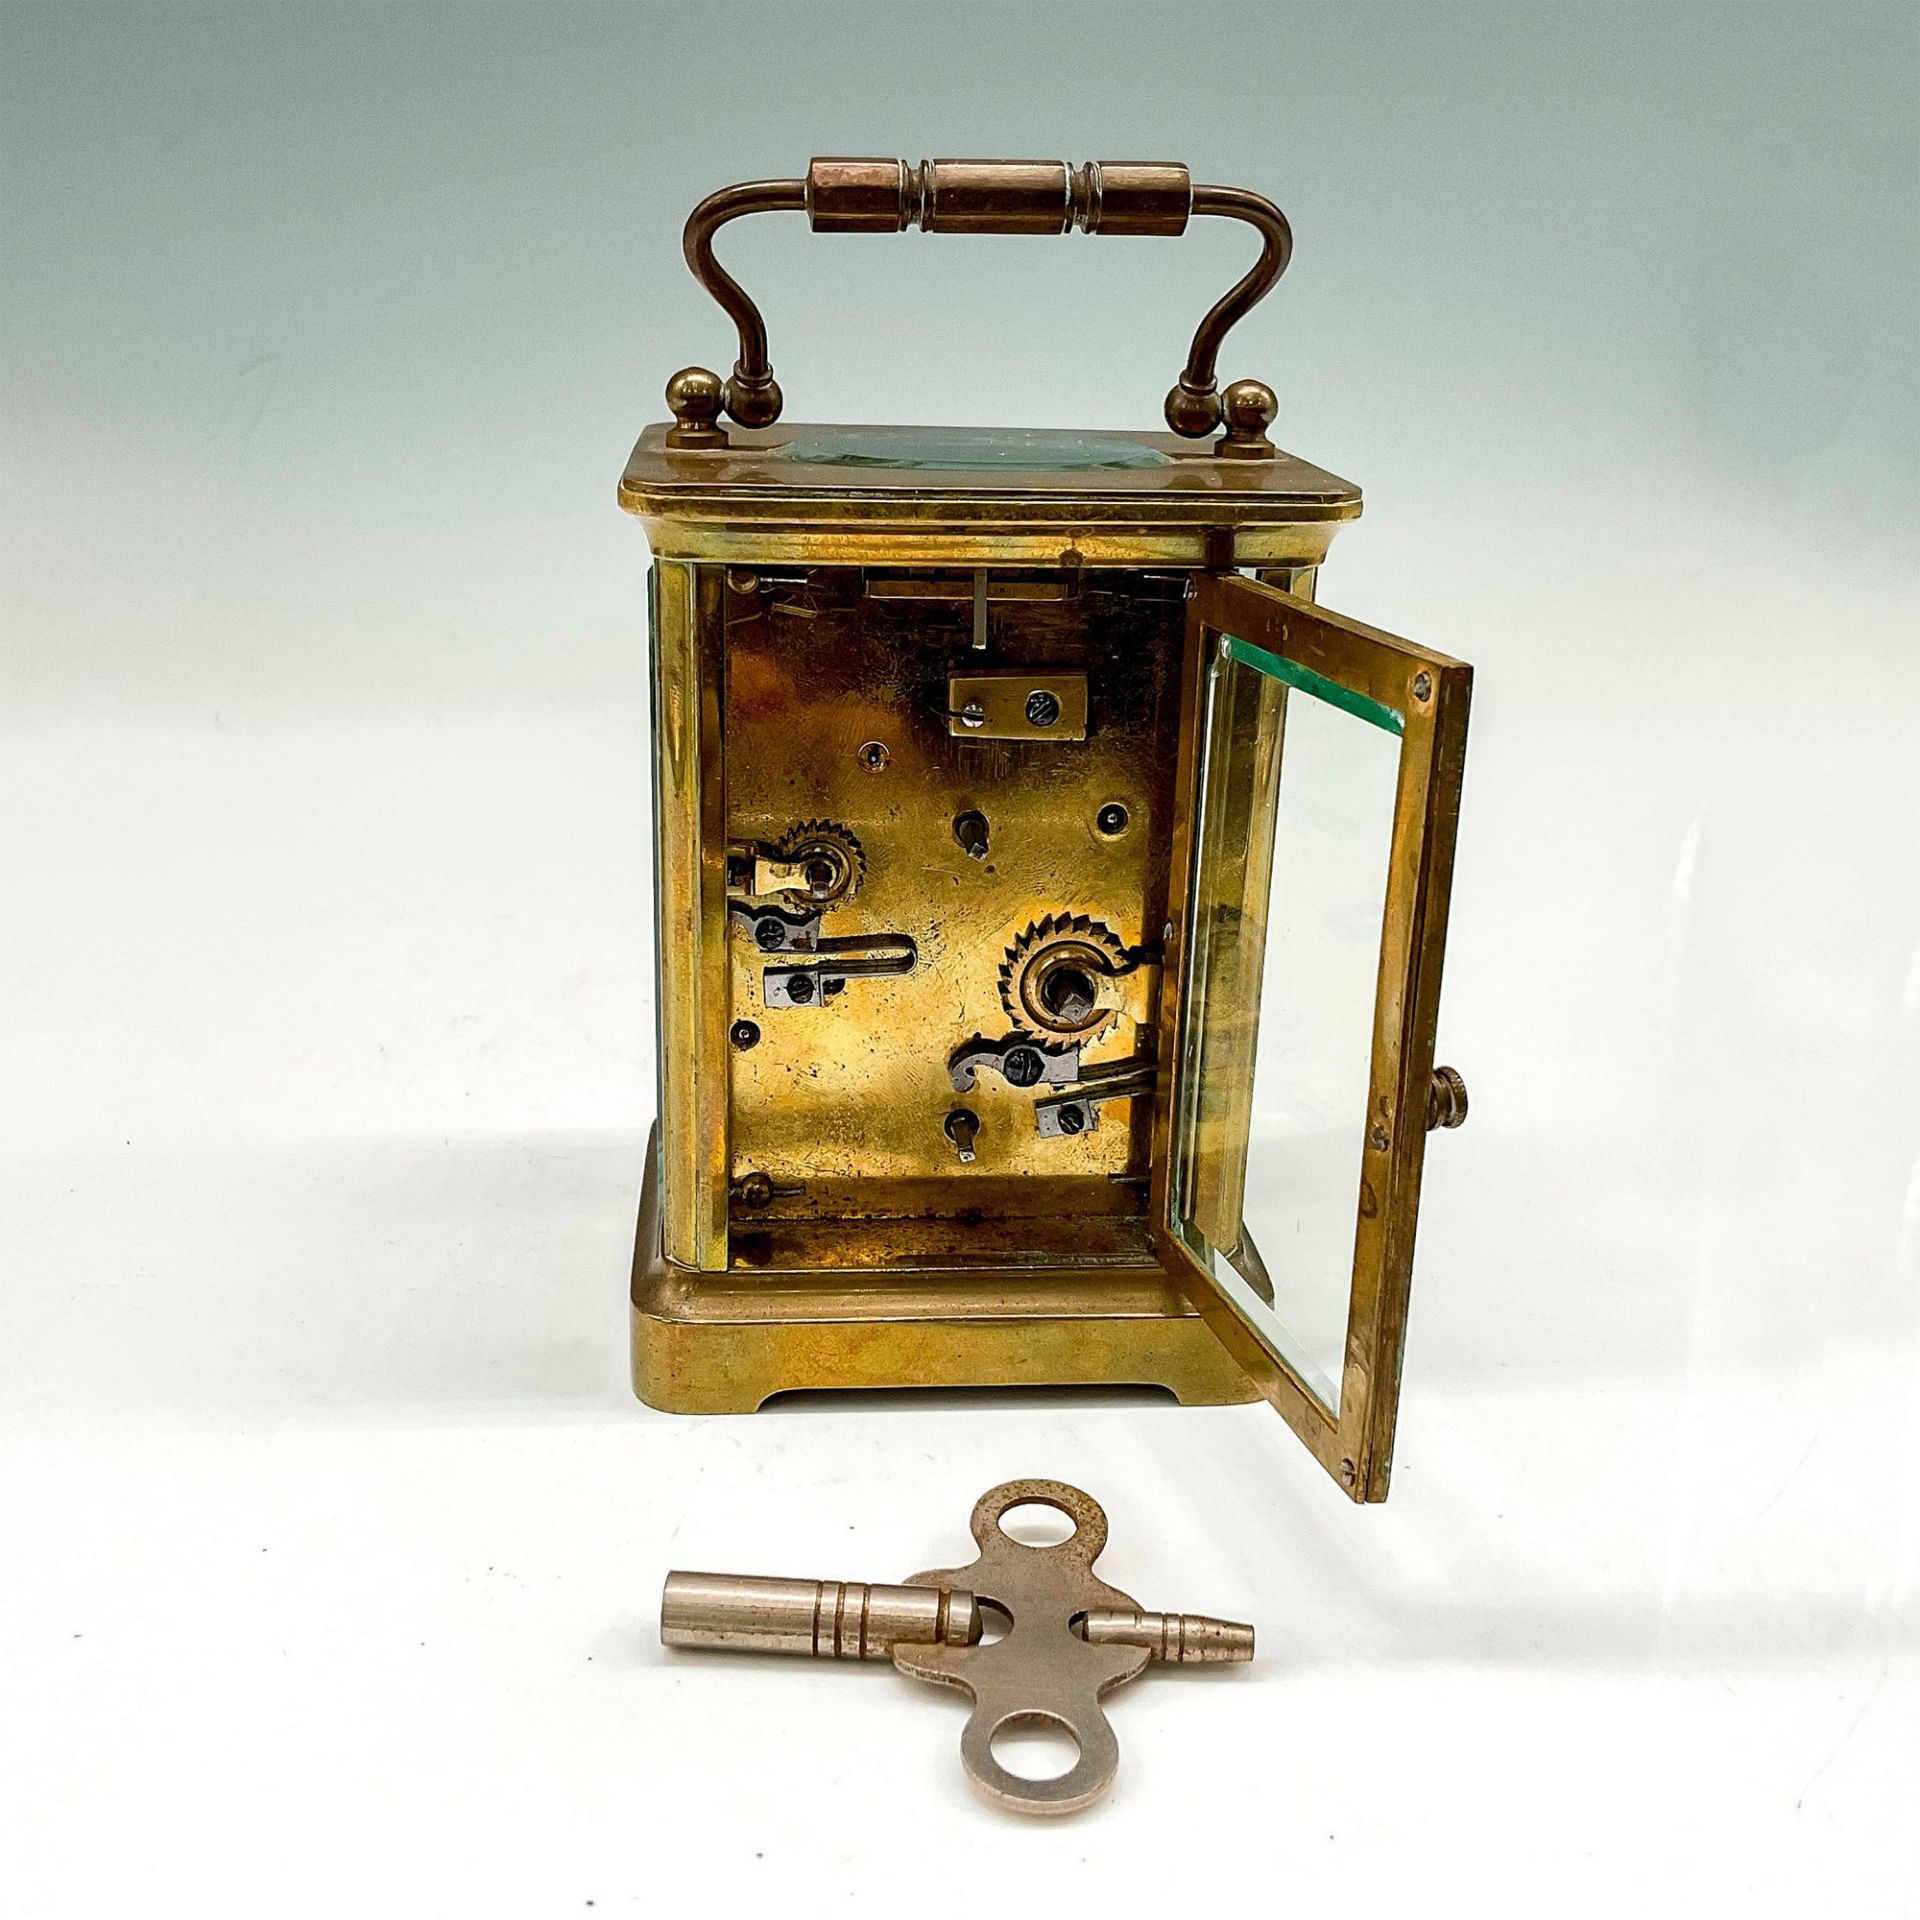 Vintage Brass Cased Carriage Clock - Image 3 of 3